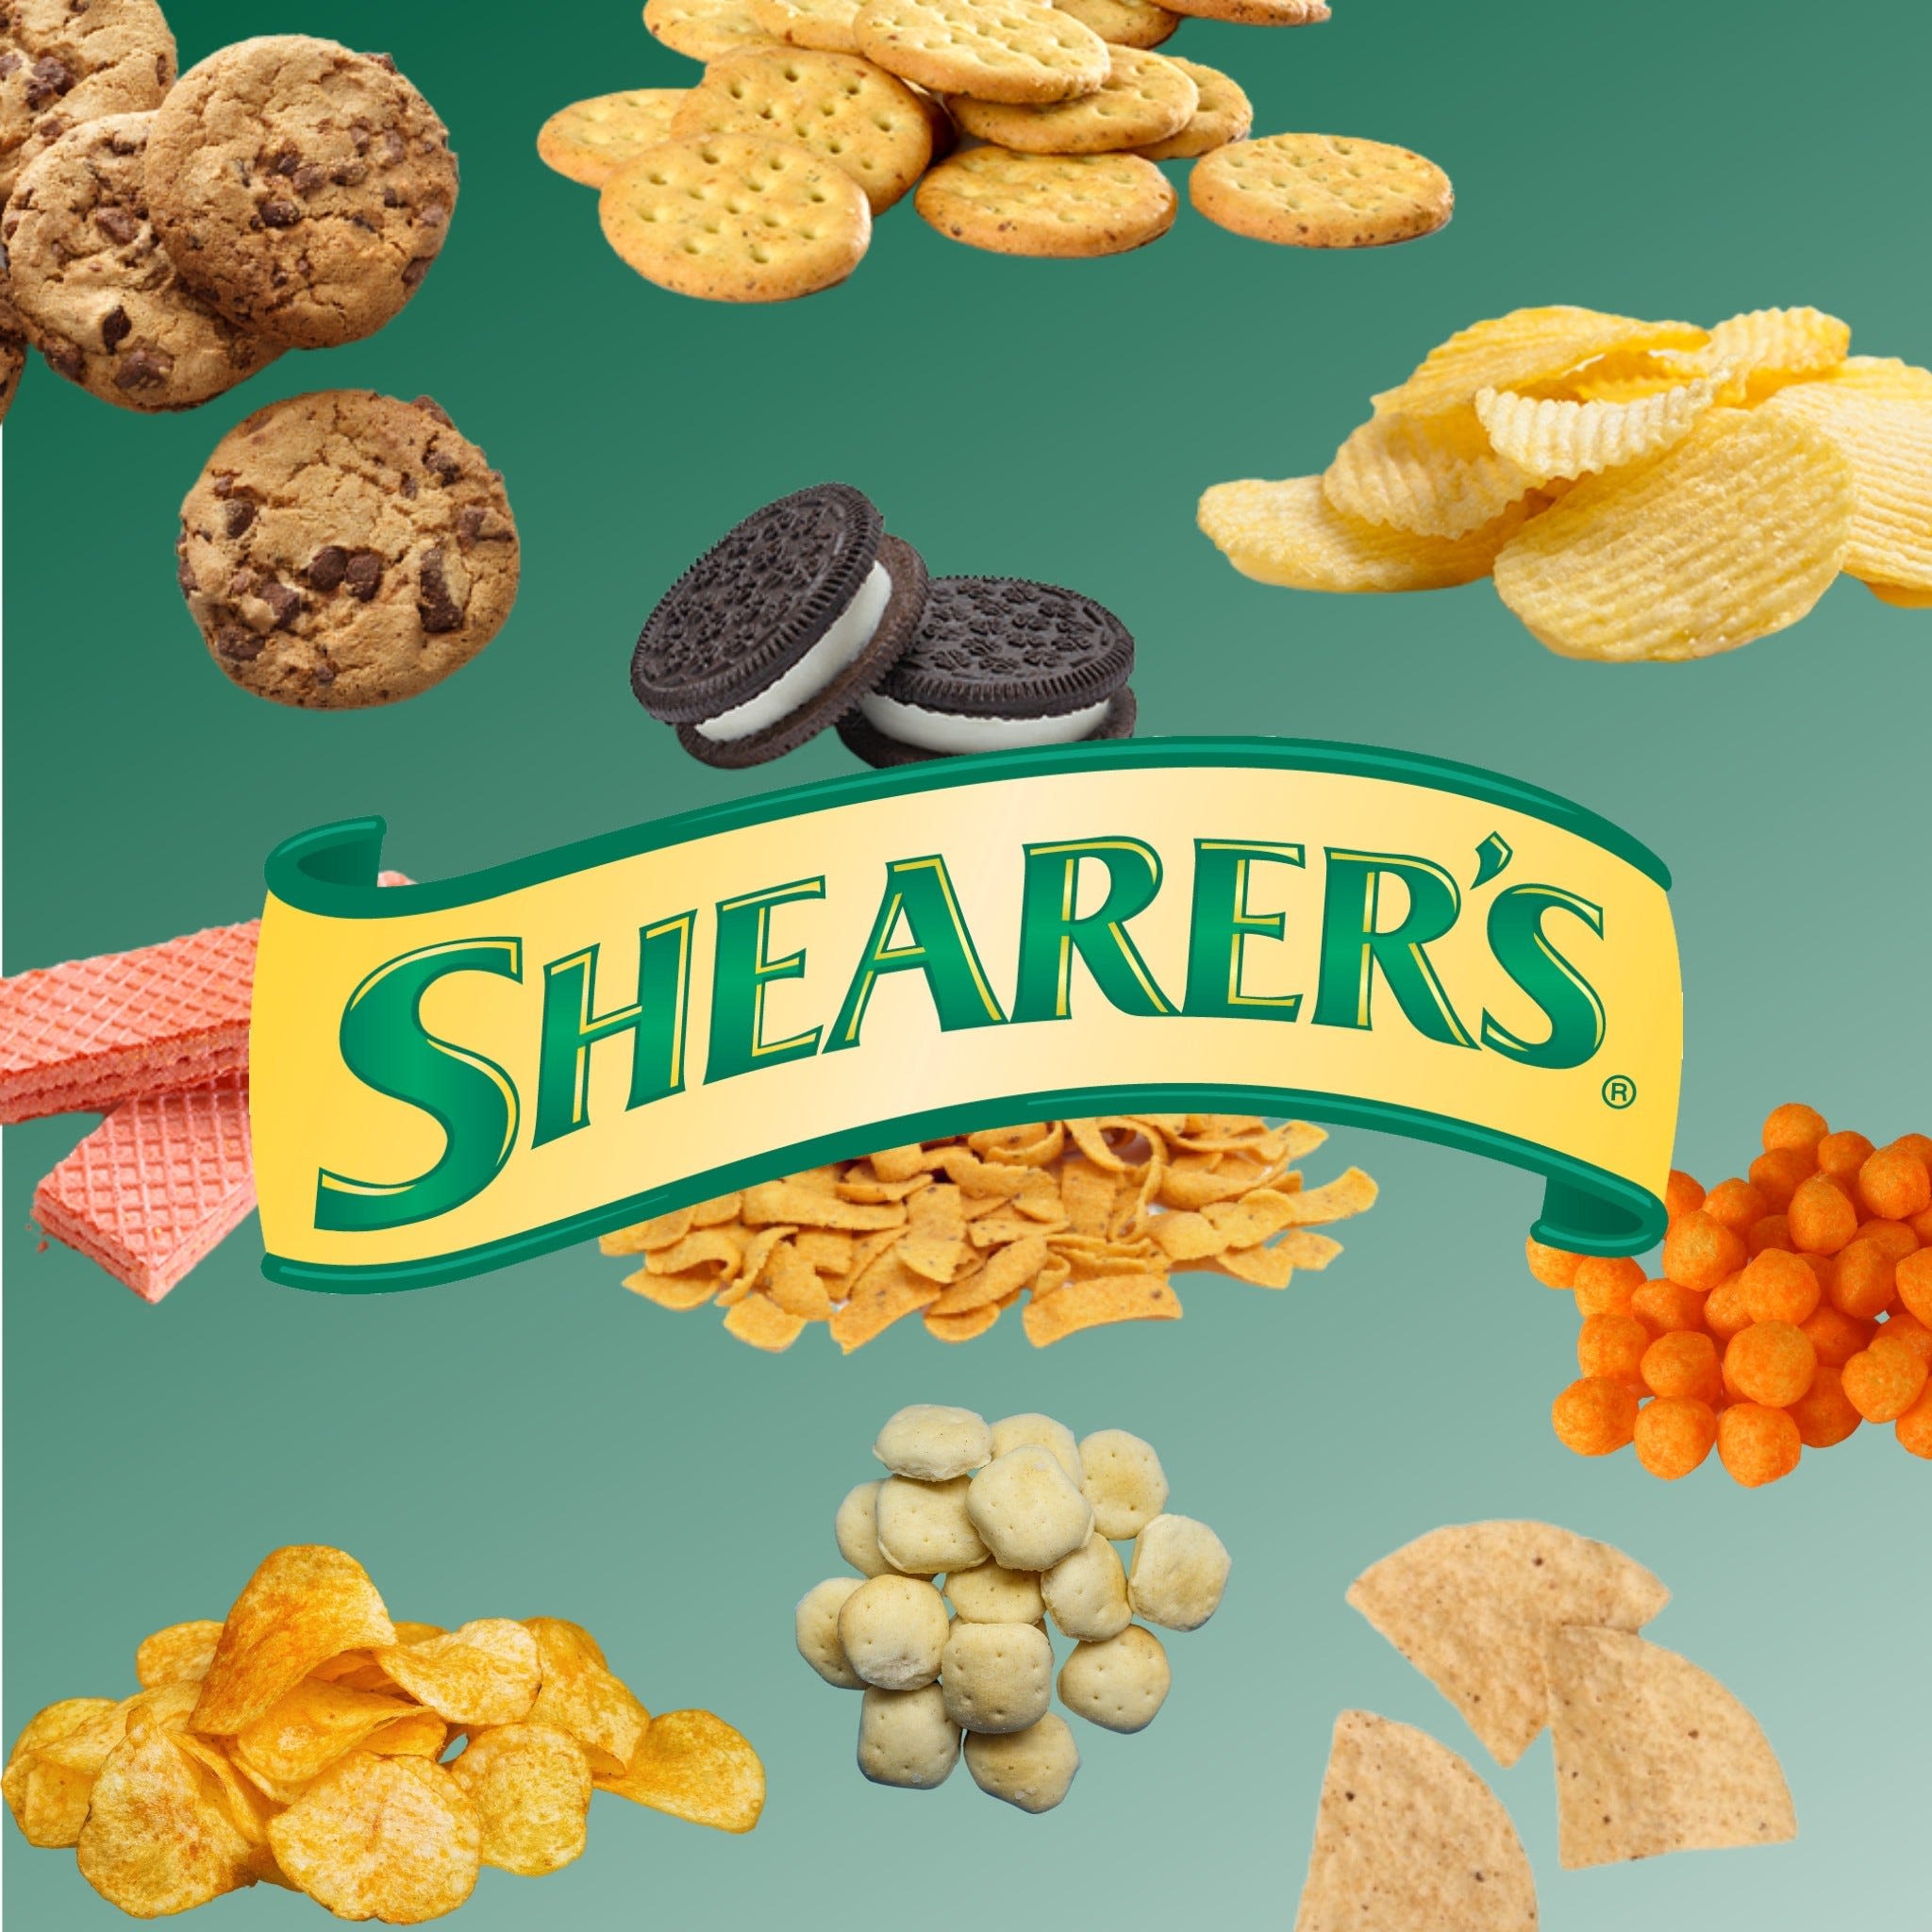 Massillon-based Shearer's Foods gets state tax credit as it eyes new facility near Dayton